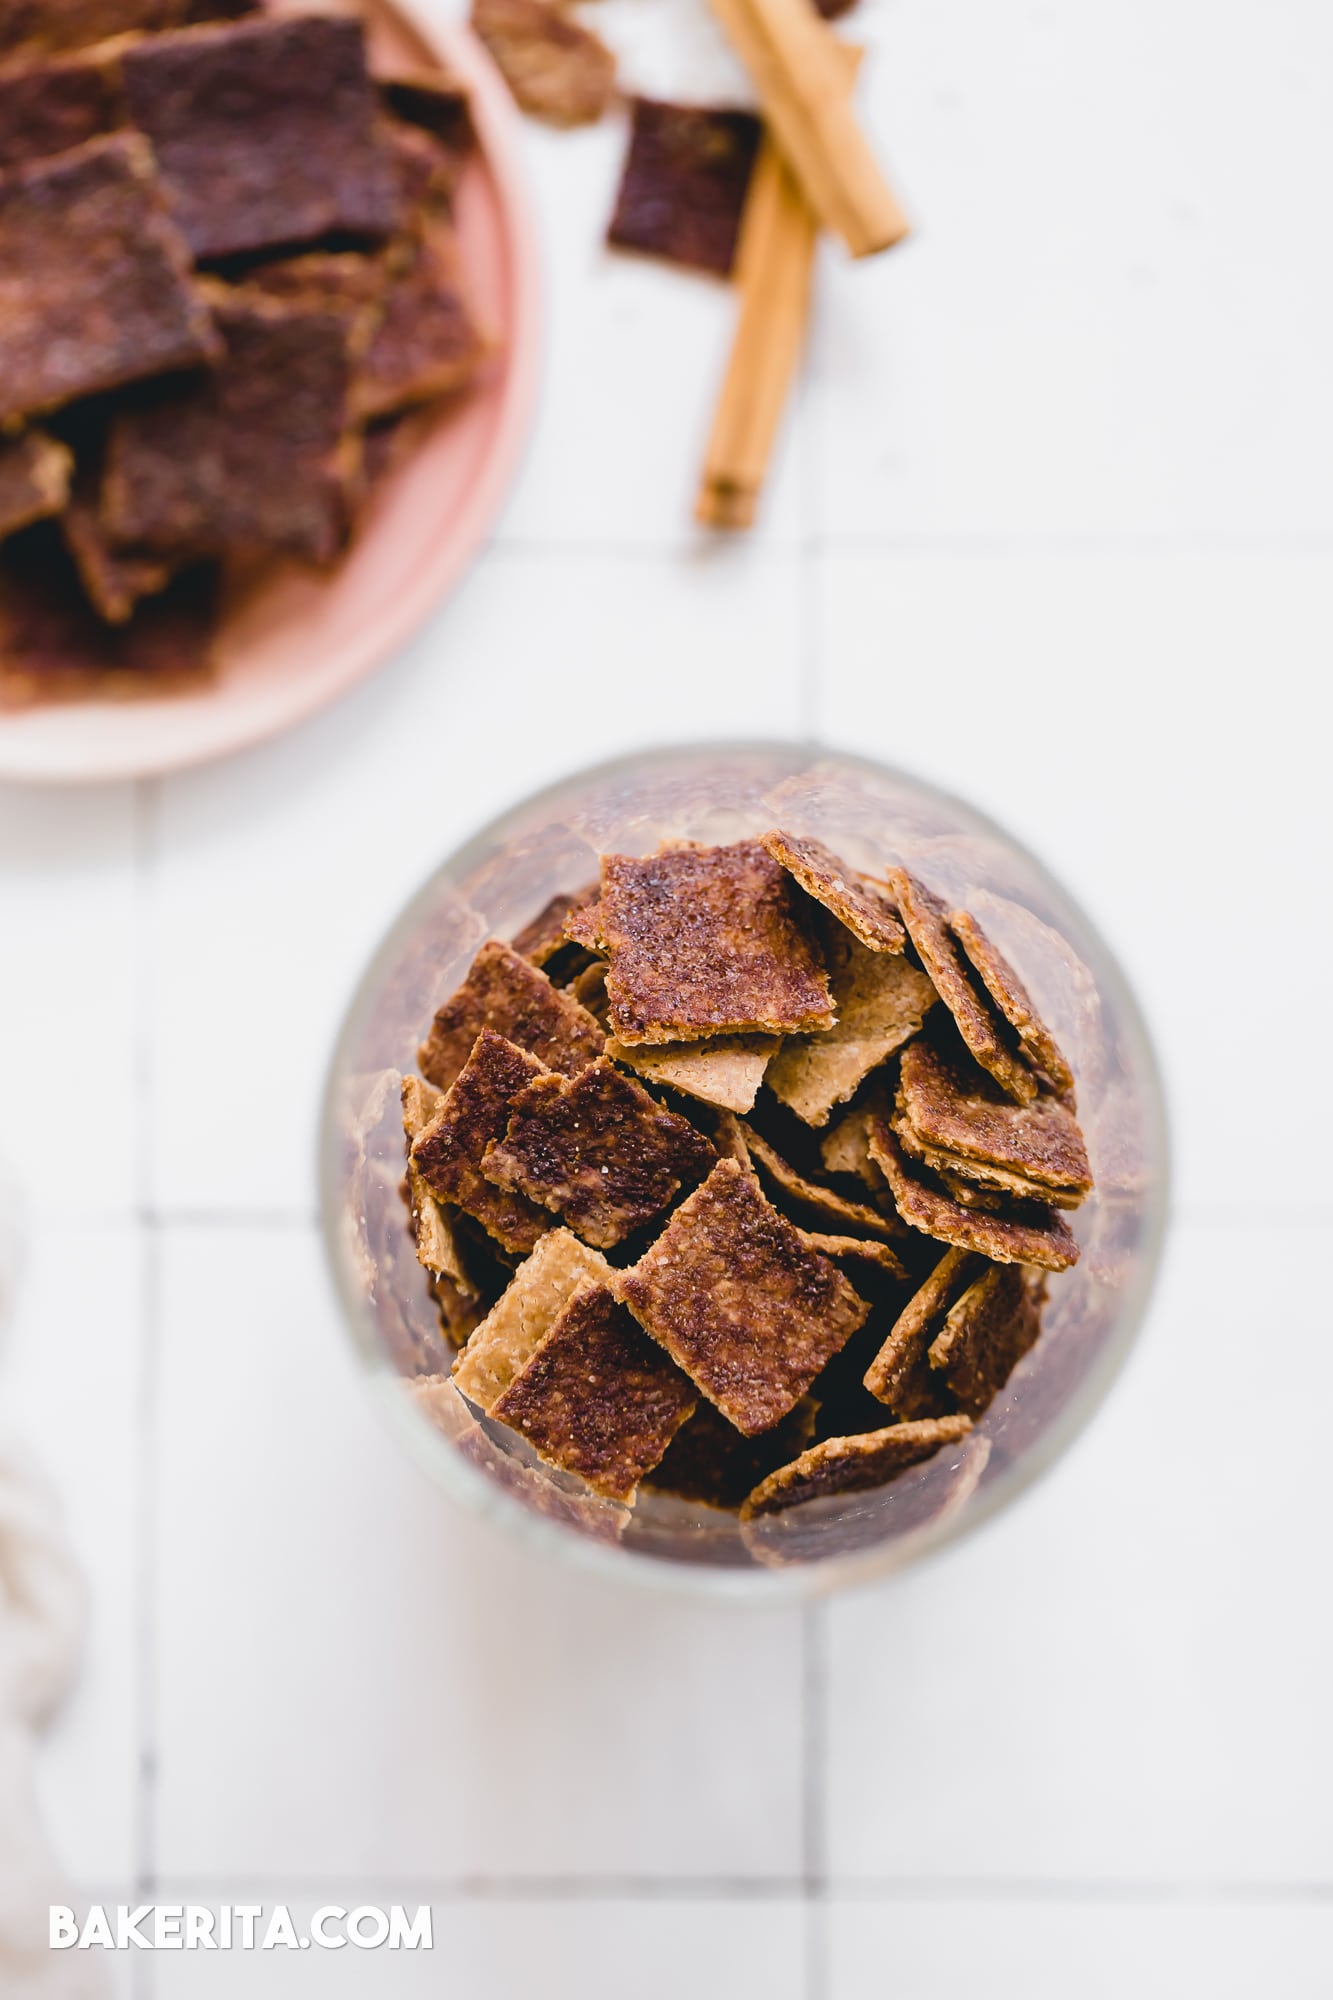 Have leftover sourdough discard? Make these Gluten-Free Cinnamon Sugar Sourdough Discard Crackers! These gluten-free crackers are quick and simple to make, and sure to satisfy your snacky sweet tooth!